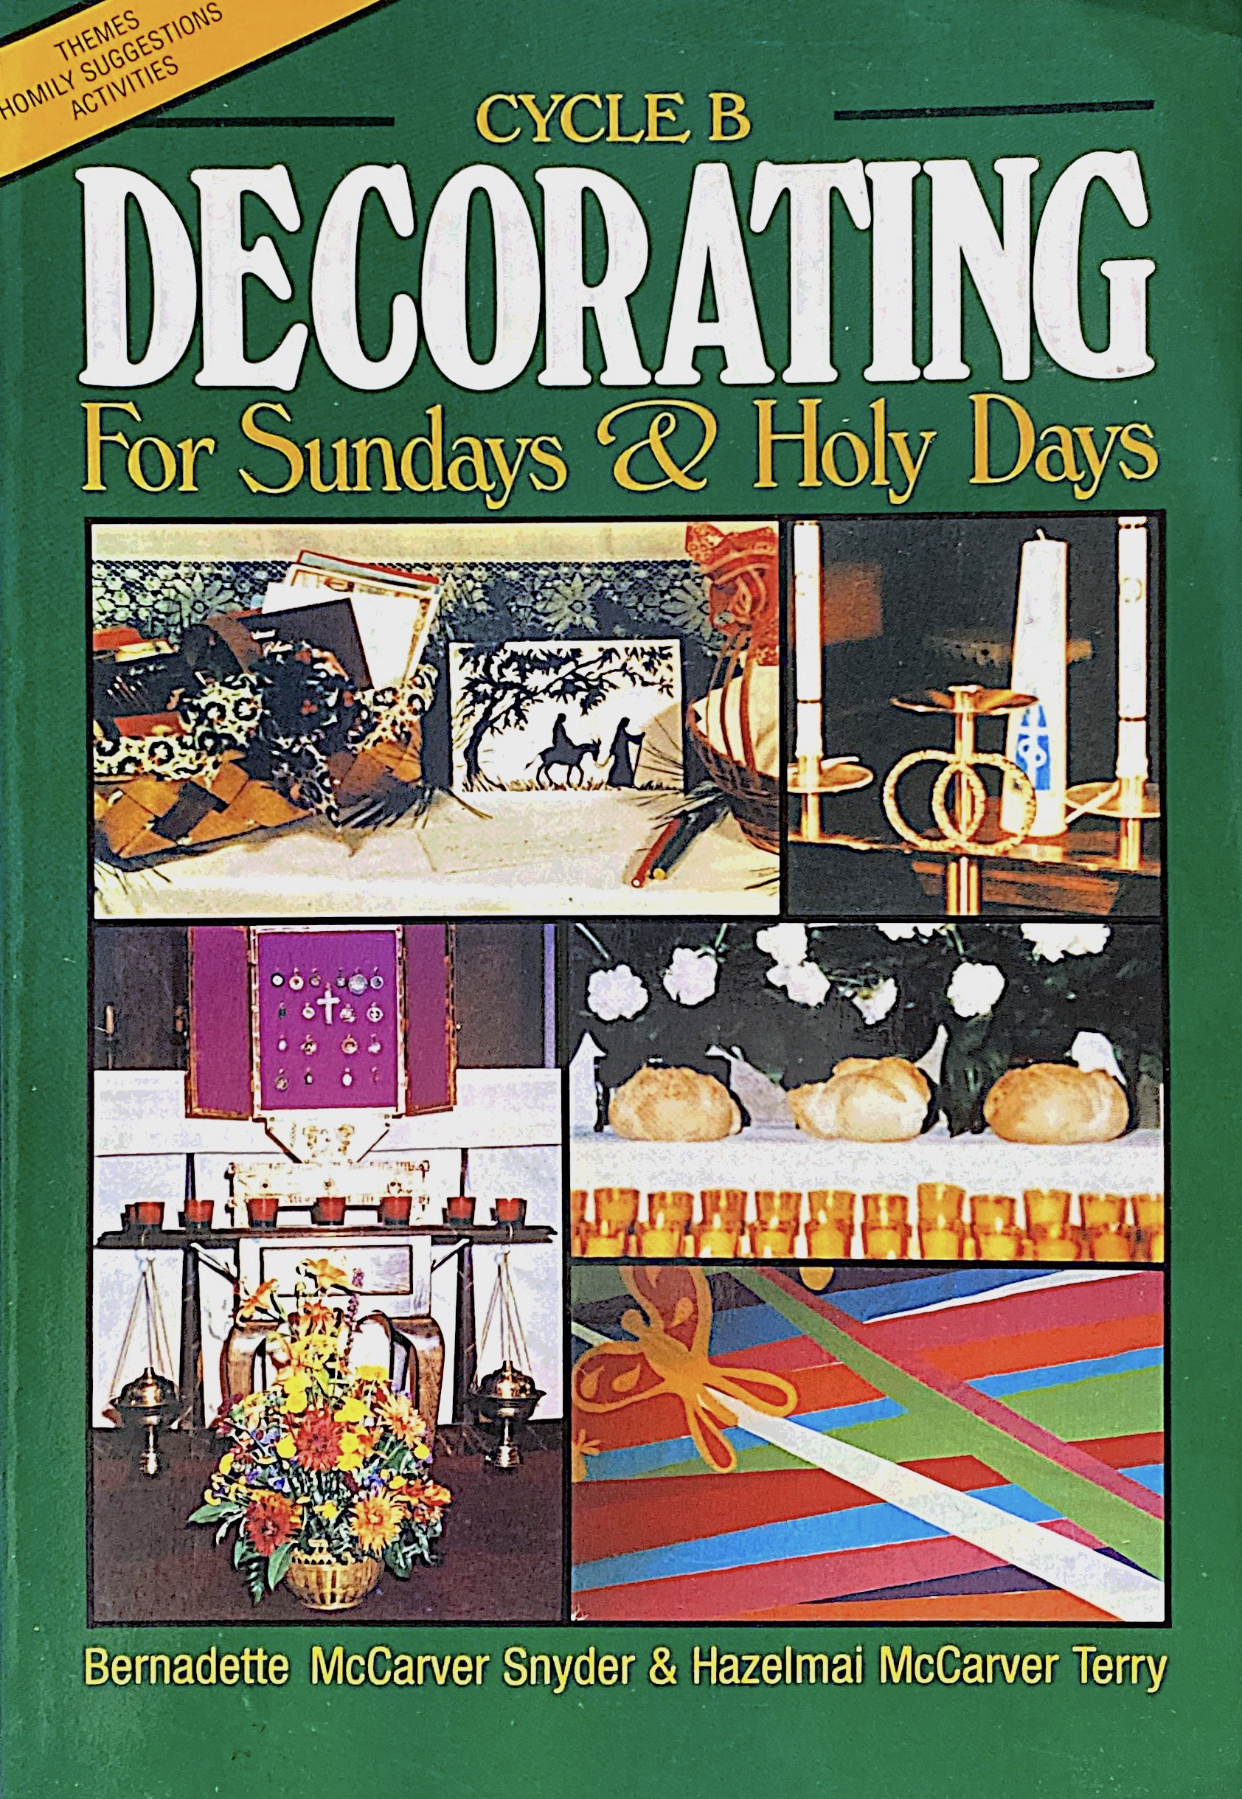 Cover of Decorating for Sundays & Holy Days Cycle B